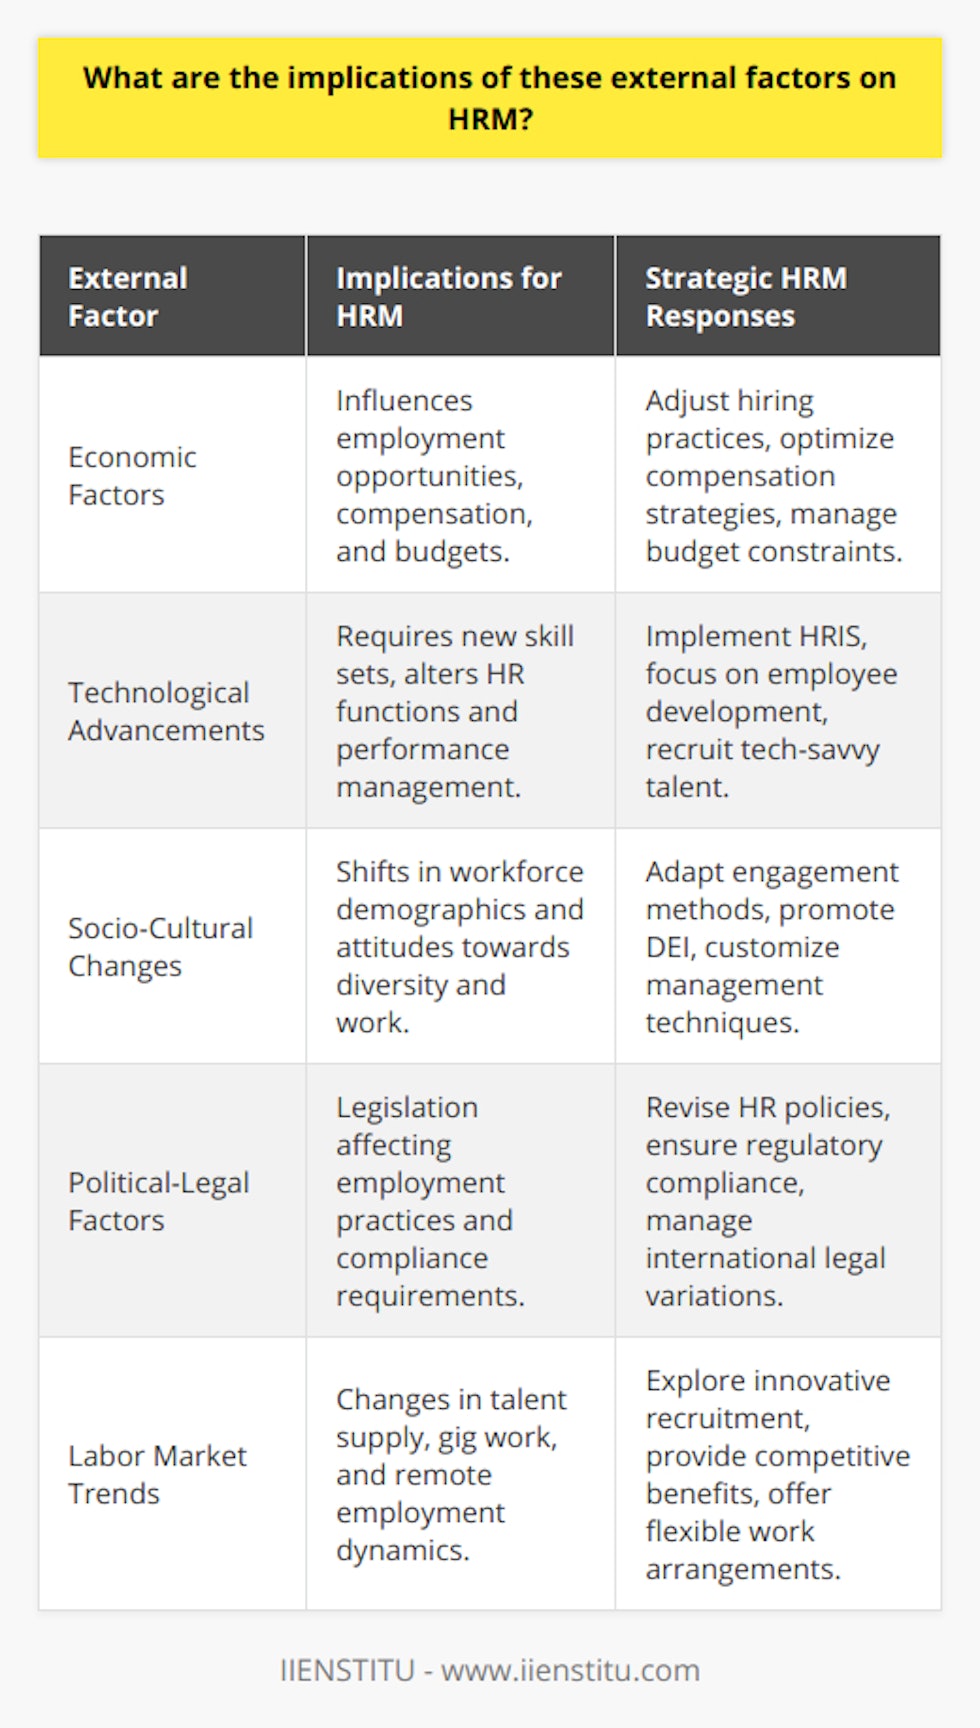 Human Resource Management (HRM) is deeply intertwined with the external environment, and the ever-changing nature of various external factors has profound implications for HRM strategies and practices. These factors can be broadly categorized into economic, technological, socio-cultural, political-legal, and labor market changes. Understanding these implications is crucial for organizational growth and sustainability.Economic Factors:The state of the economy significantly influences HRM. Economic booms, recessions, and inflation rates affect employment opportunities, compensation structures, and organizational budgets. A thriving economy may lead to more job creation and potentially higher salaries to attract skilled workers. Conversely, during economic downturns, HR departments might need to implement cost-saving measures, such as hiring freezes, layoffs, or restructuring compensation packages.Technological Advancements:Technological innovations continually reshape the way HR functions are carried out. For instance, the advent of advanced HR Information Systems (HRIS) has automated many administrative tasks, shifting the focus of HR professionals to more strategic roles. New technologies also create a demand for employees with new skill sets, pressing the HR department to prioritize learning and development, facilitate more effective recruitment strategies, and often overhaul performance management processes to align with digital work environments.Socio-Cultural Changes:Socio-cultural dynamics, such as changing workforce demographics and attitudes towards work and diversity, have significant HRM implications. As generations with different work preferences enter the workforce, HR must adapt their engagement, communication, and management techniques. Increased awareness of the importance of diversity, equity, and inclusion demands comprehensive HR policies that foster a positive, inclusive culture and support a wide range of employee needs.Political-Legal Factors:HRM is subject to numerous laws and regulations that govern employment practices. Changes in legislation related to labor law, workplace health and safety, equal employment opportunity, and data protection can compel HR departments to revise policies and procedures to ensure compliance. Global organizations must also navigate varying legal landscapes across different countries, impacting HR strategies at the international level.Labor Market Trends:Labor market trends, such as talent shortages in certain industries, gig economy proliferation, and shifting employee expectations, directly affect HRM practices. HR departments must tap into innovative recruitment channels, offer competitive benefits, and design flexible work arrangements to attract and retain top talent. Additionally, the rise of remote work has led to new challenges and opportunities in talent acquisition, performance management, and employee engagement.Furthermore, organizations like IIENSTITU that offer professional training, development programs, and certifications can play a pivotal role in enabling HR professionals to stay abreast of these external factors and equip them with the skills needed to tackle related challenges effectively.In conclusion, the implications of external factors on HRM are far-reaching and demand a proactive, strategic approach. HR professionals must continuously scan the environment, anticipate changes, embrace agility, and leverage partnerships to navigate these complexities. By doing so, HRM can not only mitigate risks associated with external influences but can also drive organizational growth and adaptability amidst ever-evolving external landscapes.